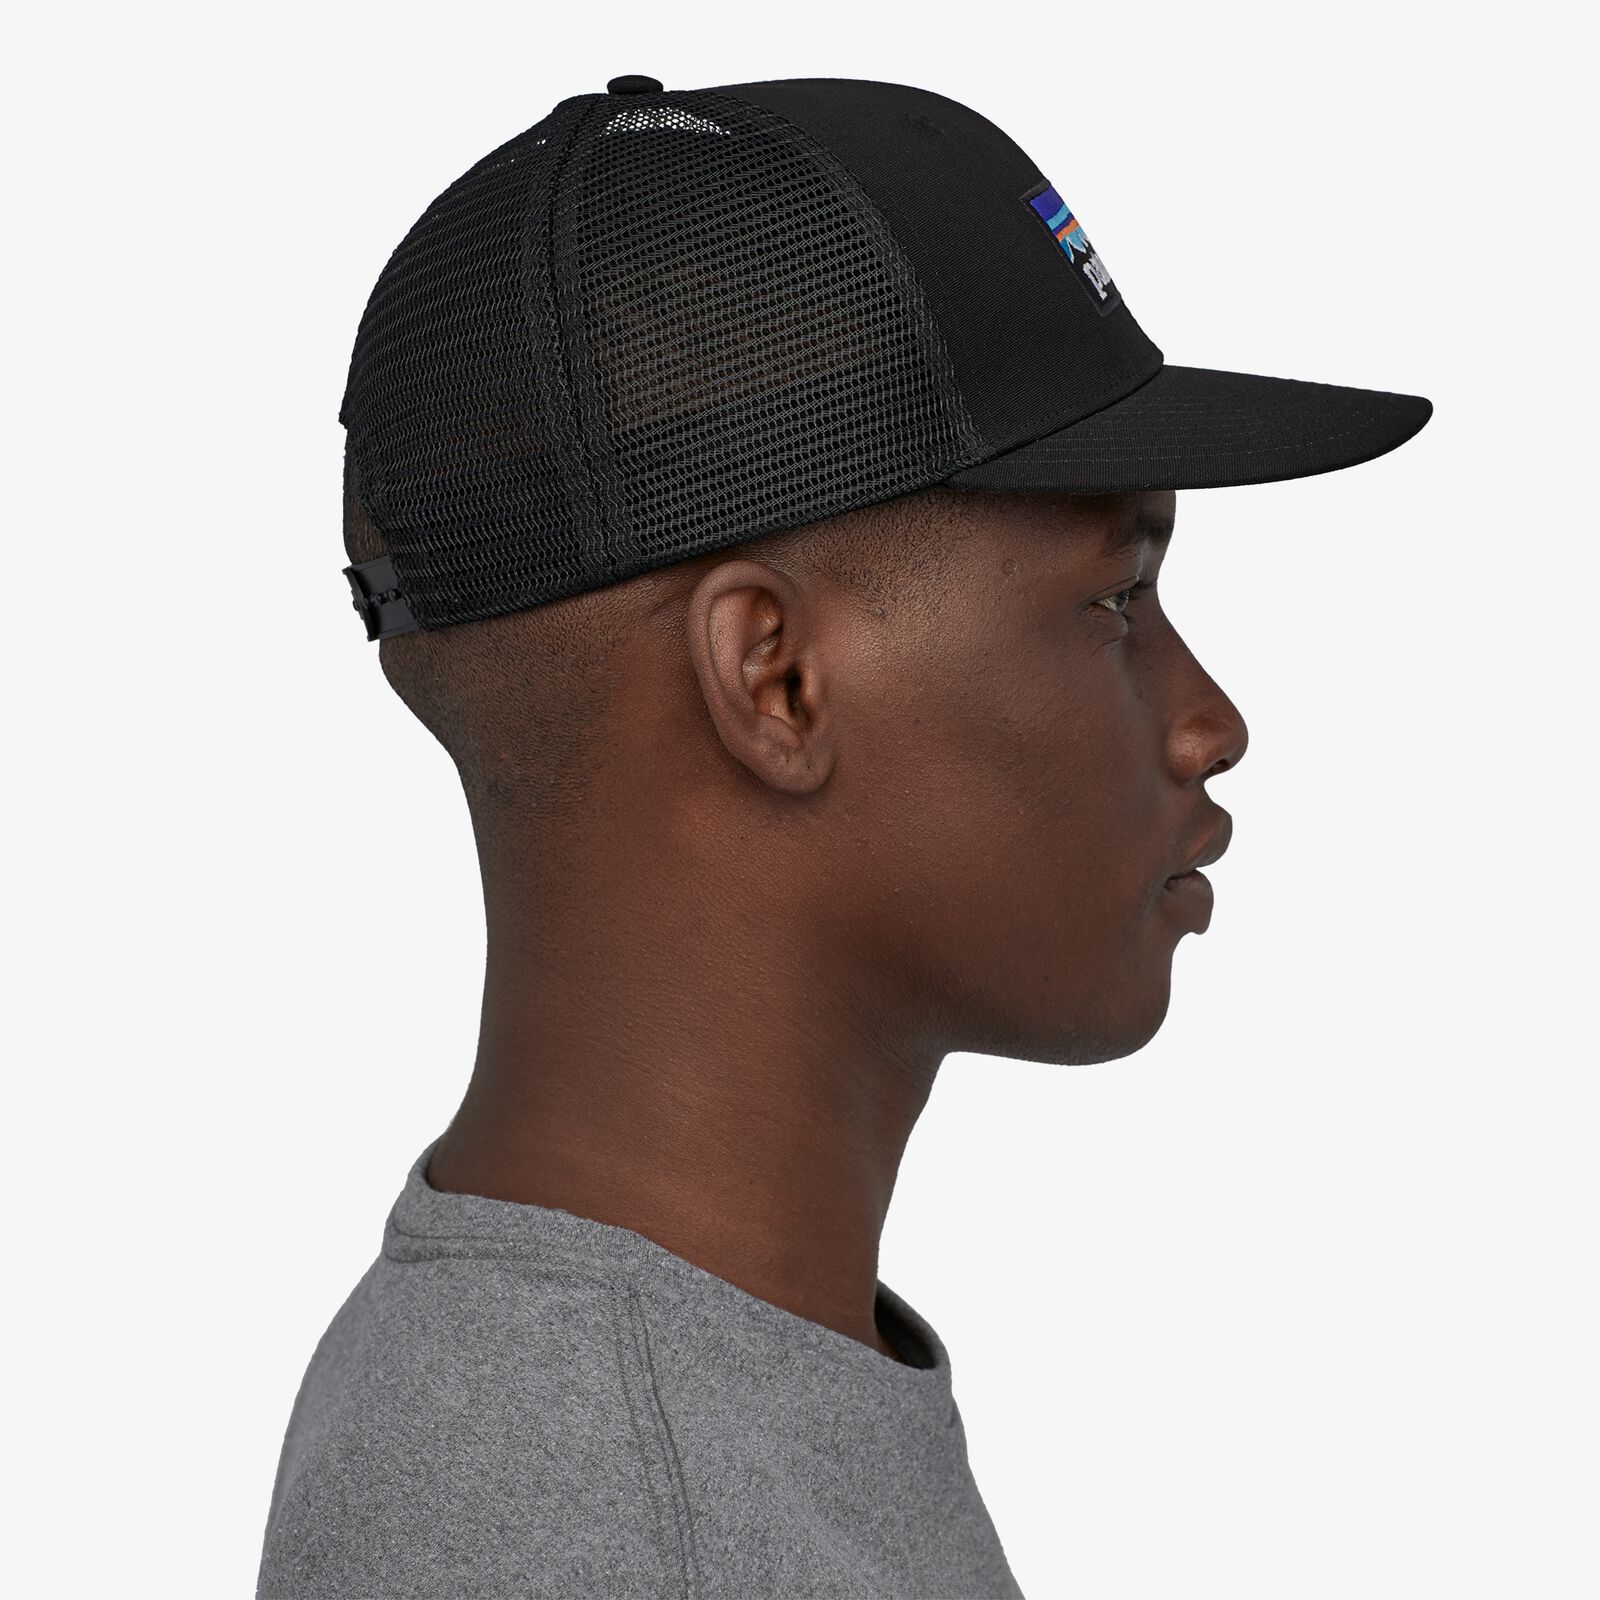 Lo Pro - Patgonia P6 Trucker Cap - African Waters